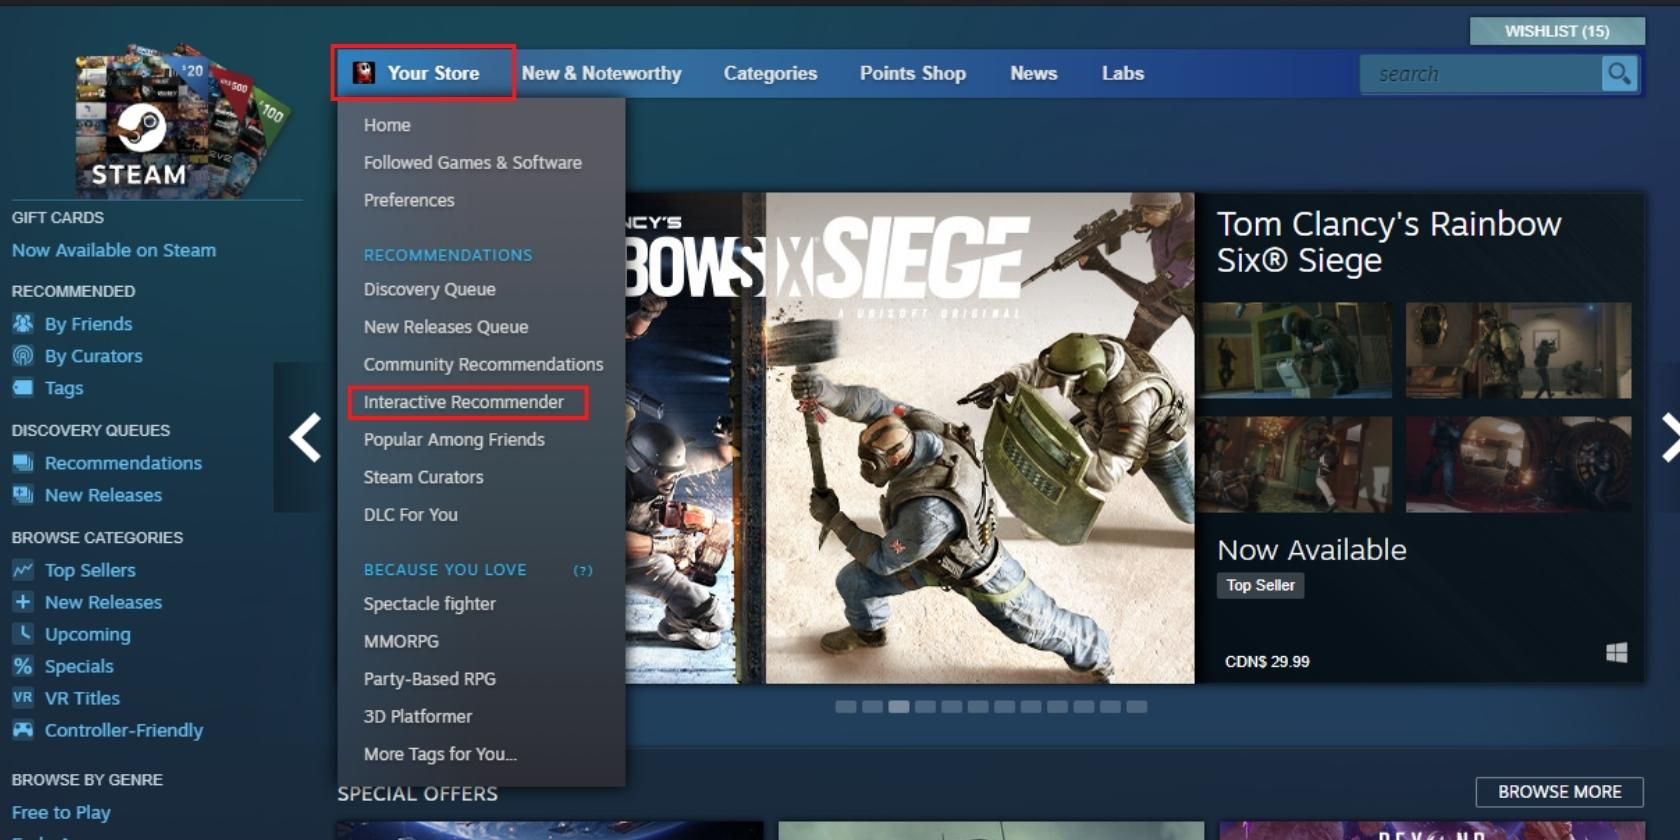 The Steam home page with red rectangles emphasizing the Your Store dropdown menu and the Interactive Recommender